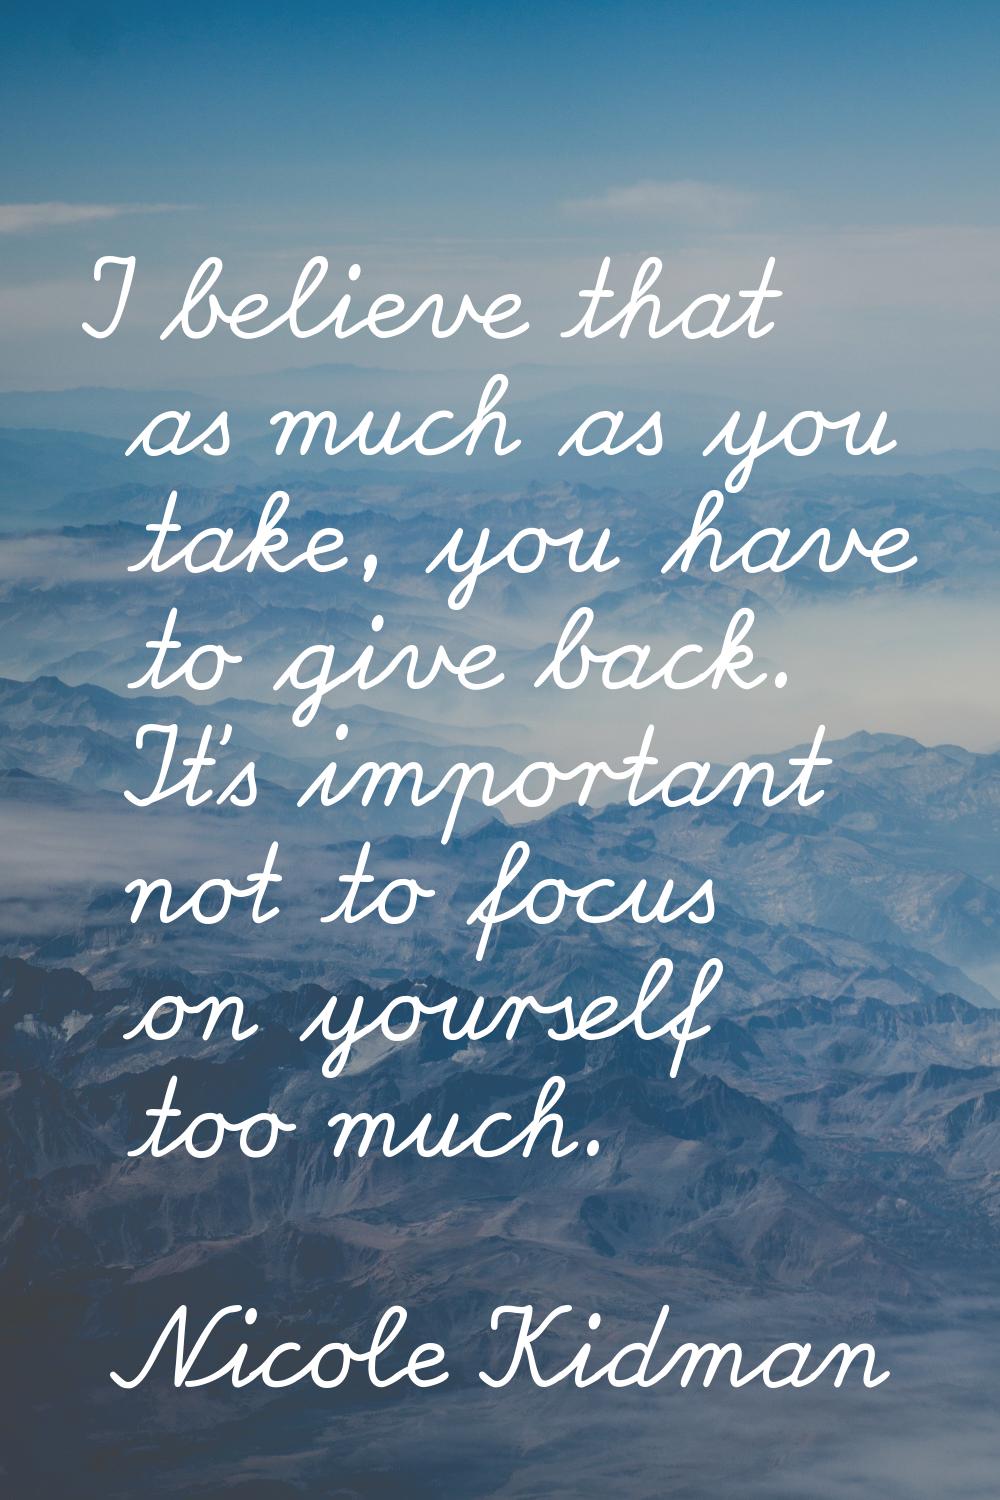 I believe that as much as you take, you have to give back. It's important not to focus on yourself 